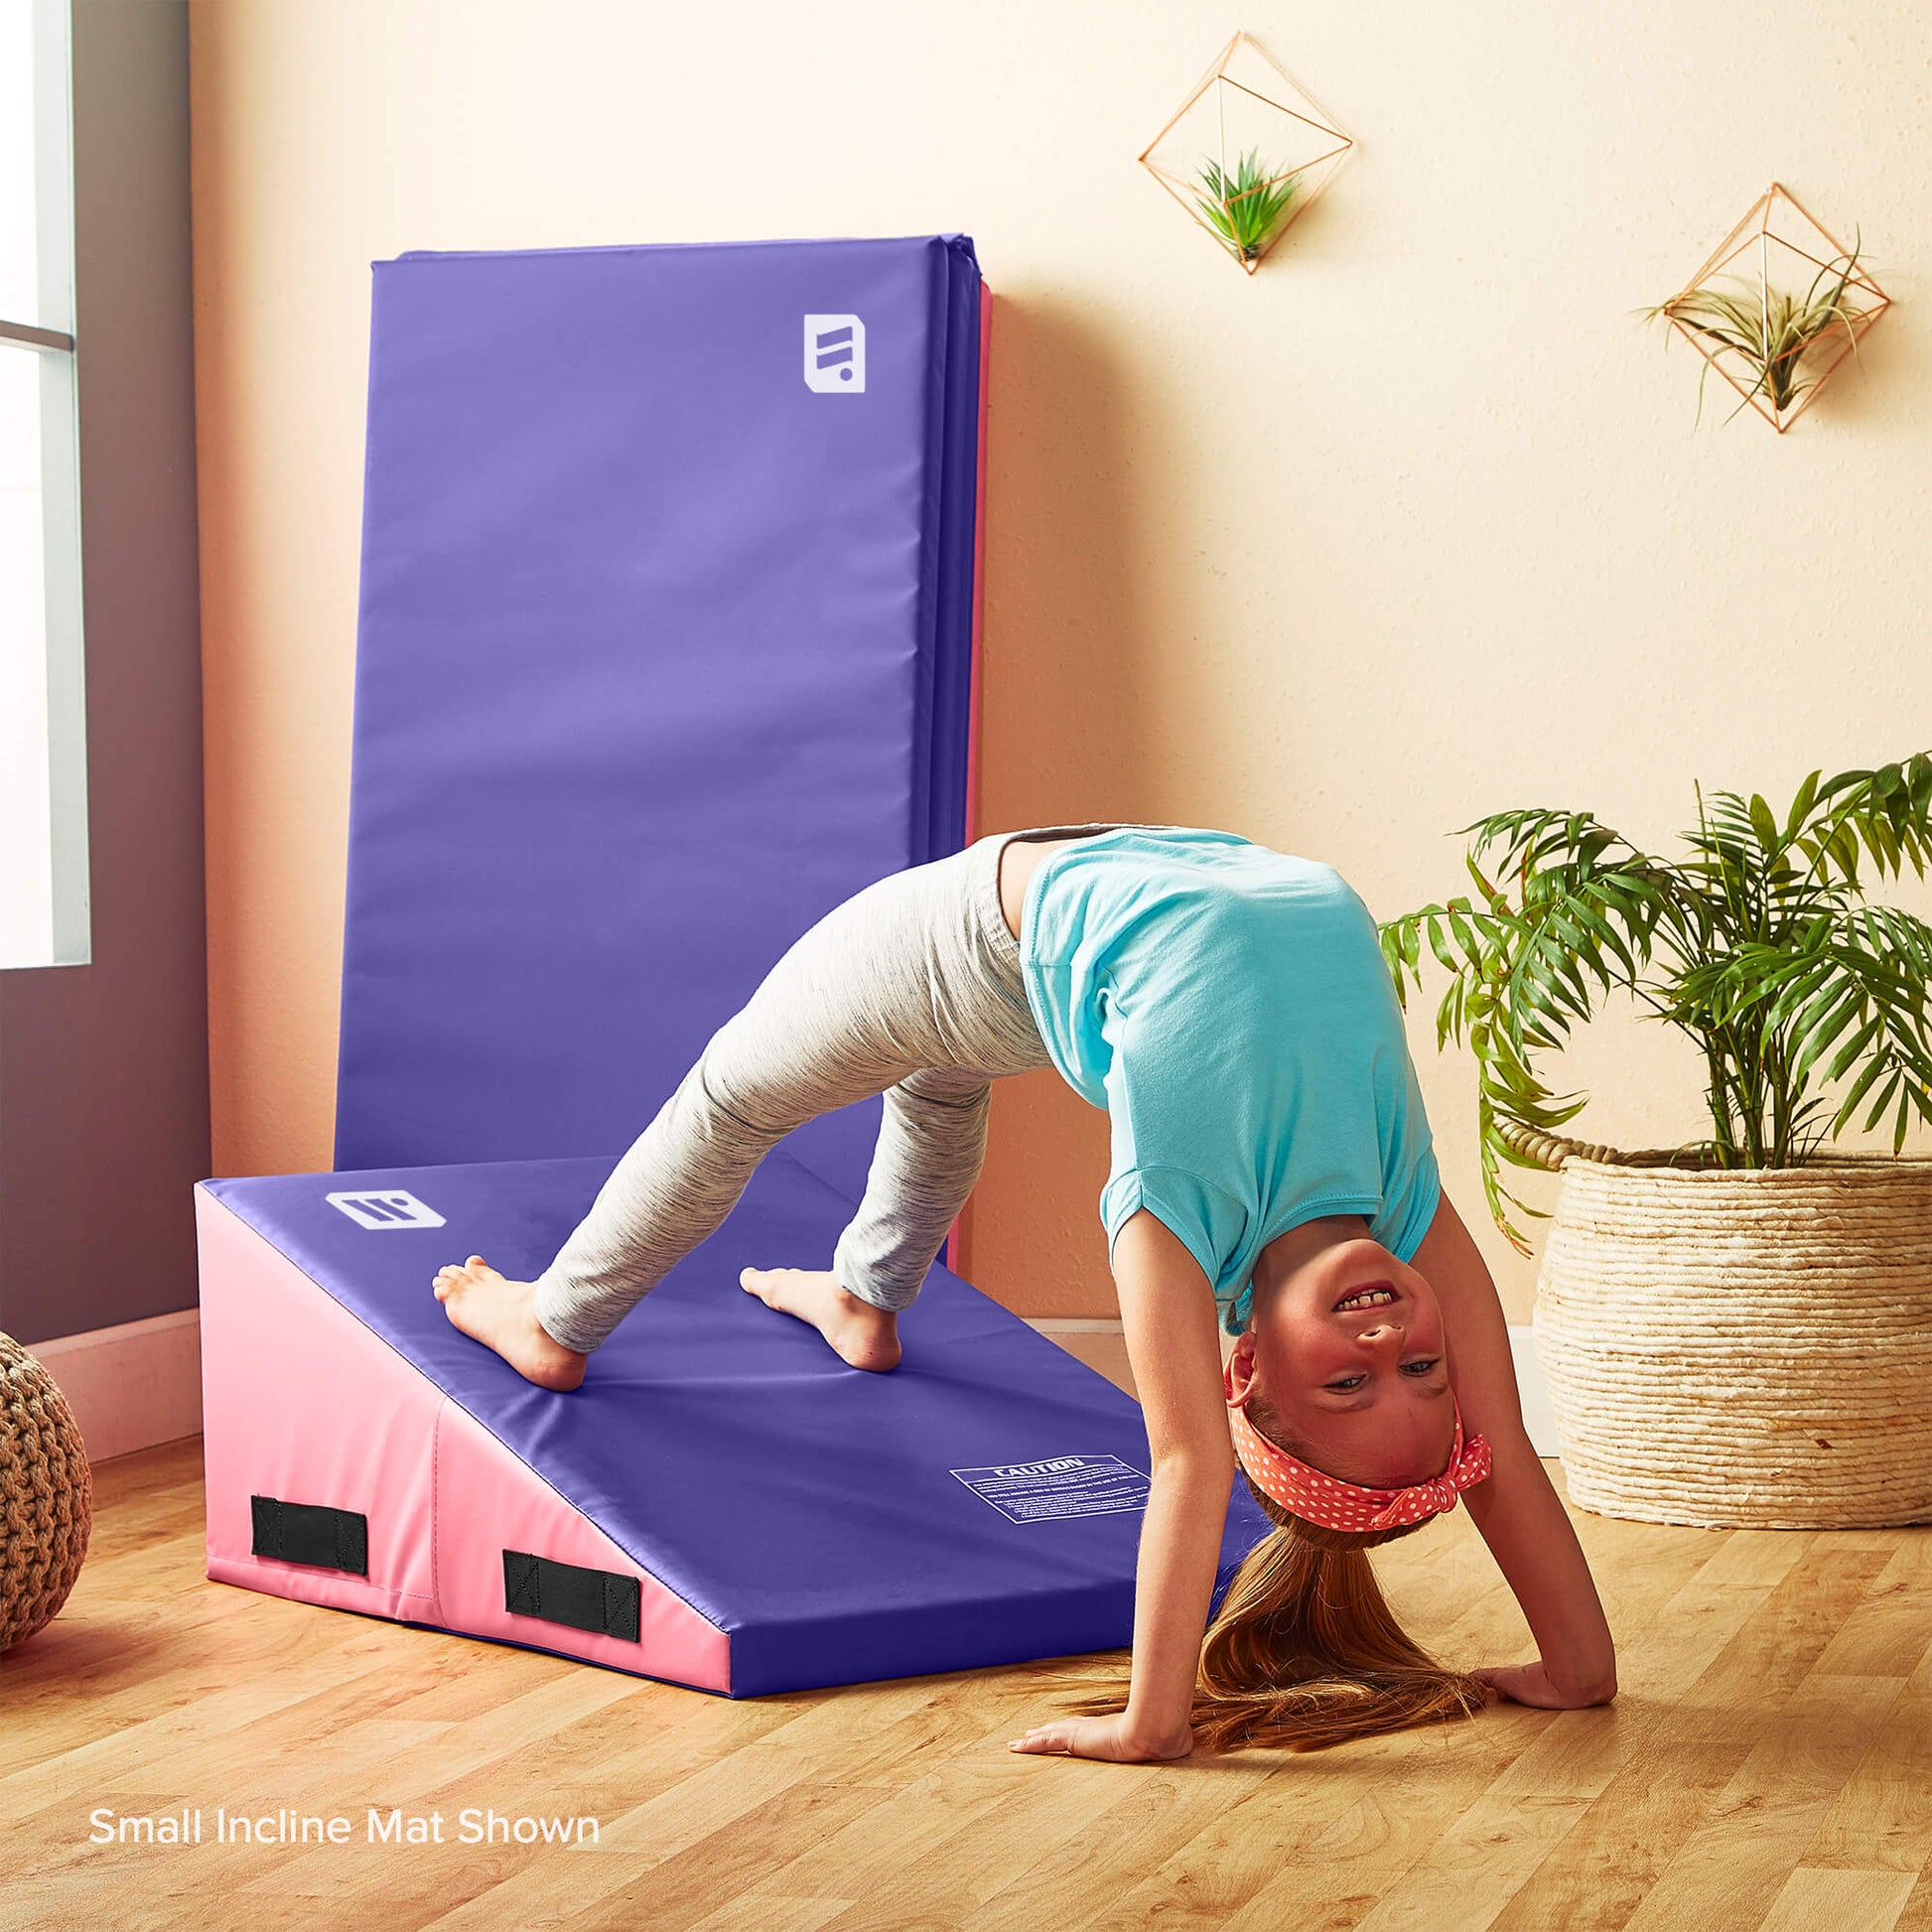 Incline Mats for Preeschool & Toddlers